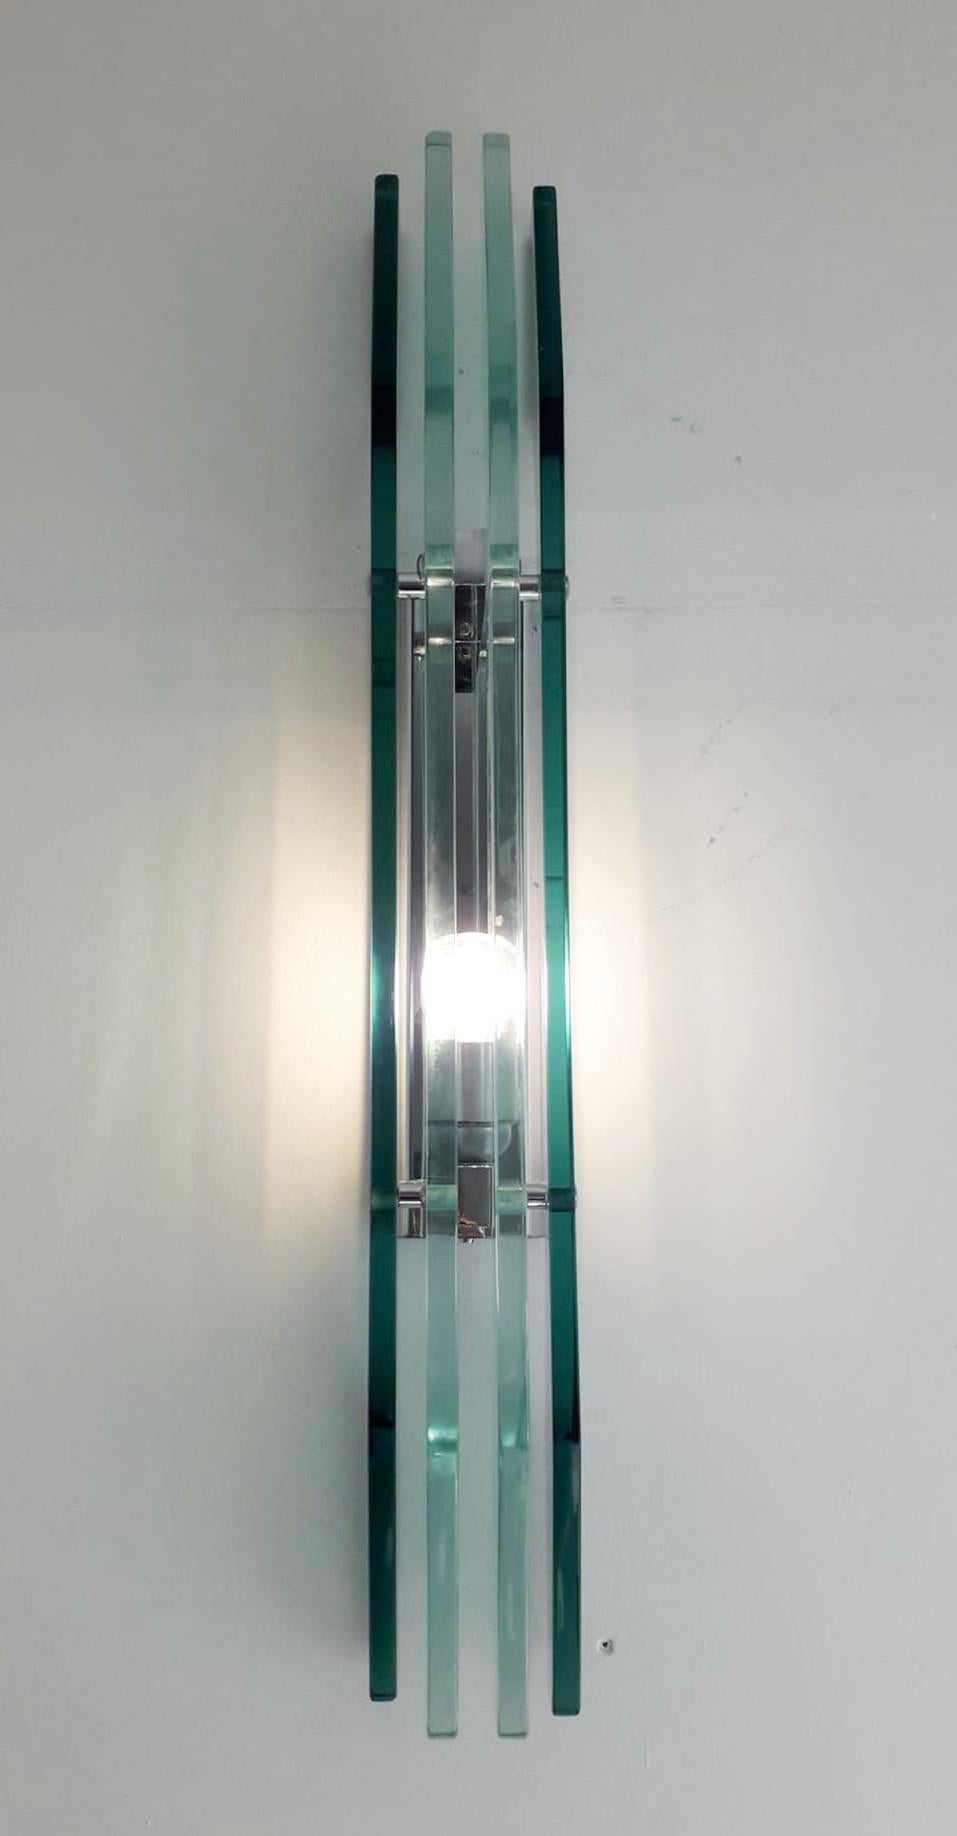 Glass Rare Pair of Large Beveled Sconces by Veca - 2 Pairs Available For Sale